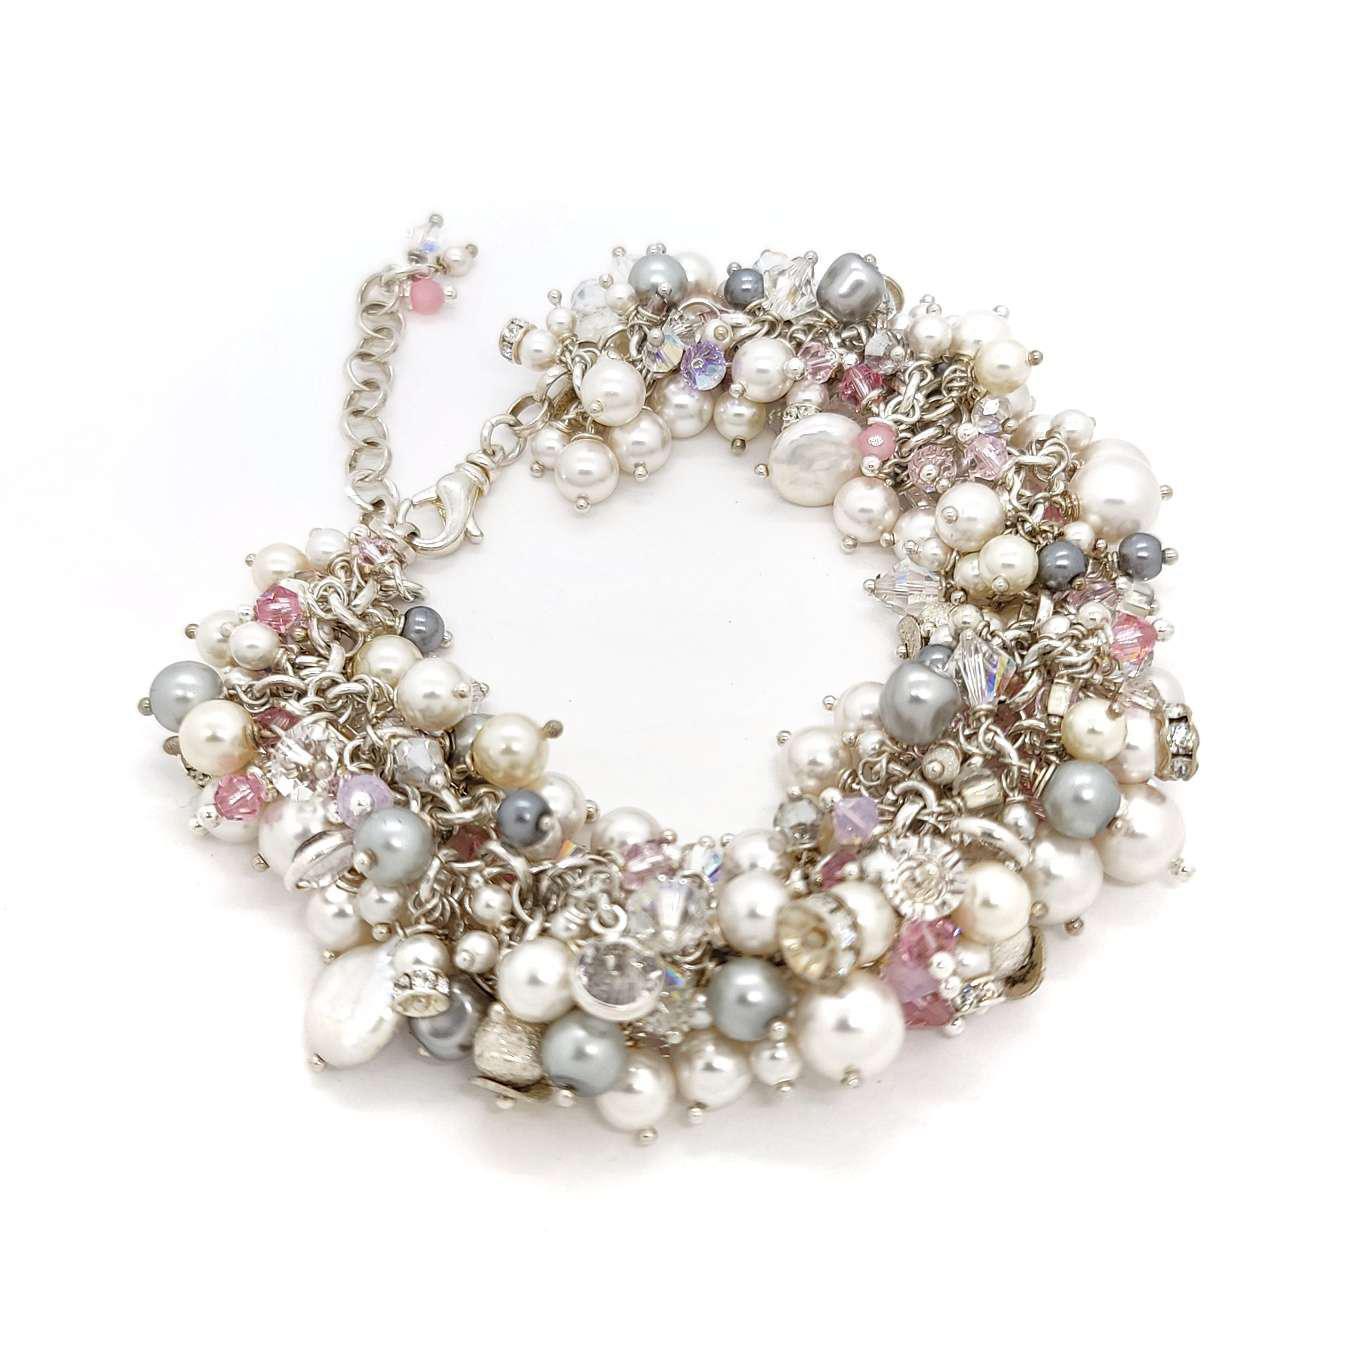 Bracelet - Blush Rose White and Gray Pearls and Crystals by Sugar Sidewalk